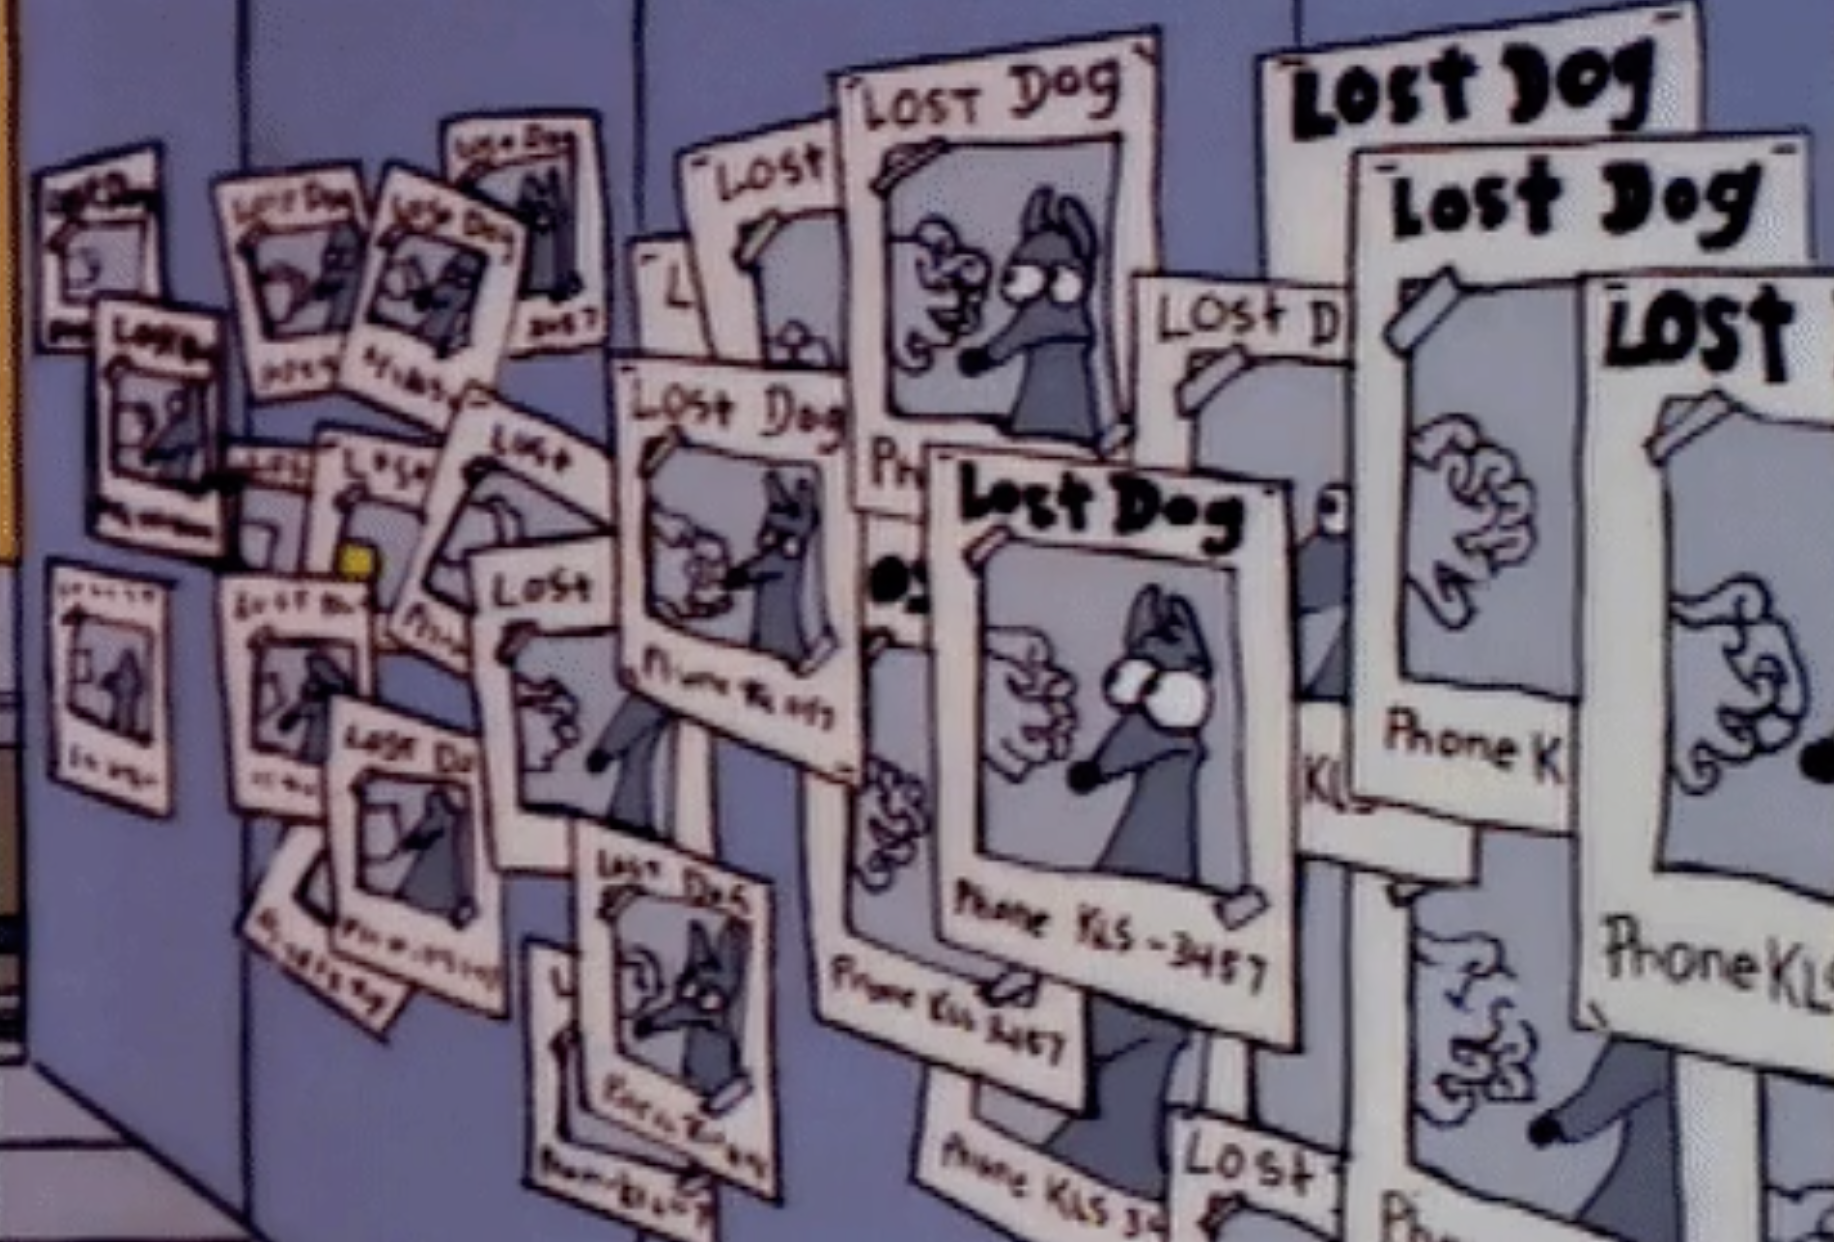 Lost dog posters